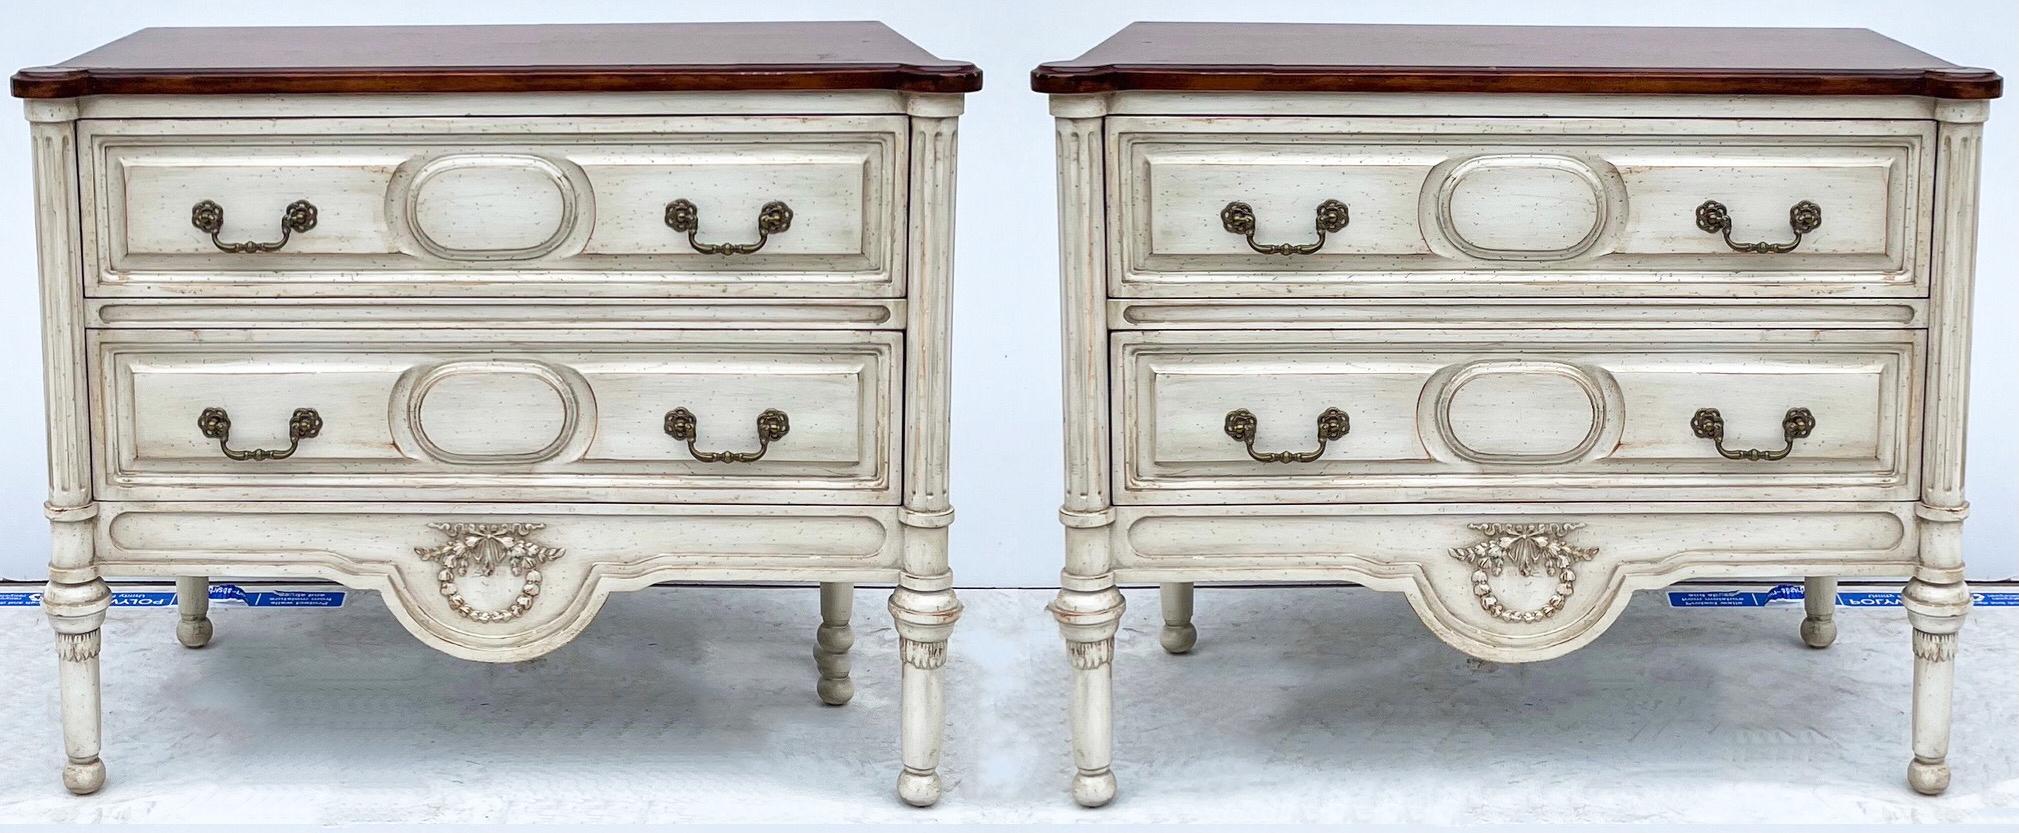 Mahogany Late 20th-C. Custom French Neo-Classical Style Painted Chests / Side Tables - 2 For Sale